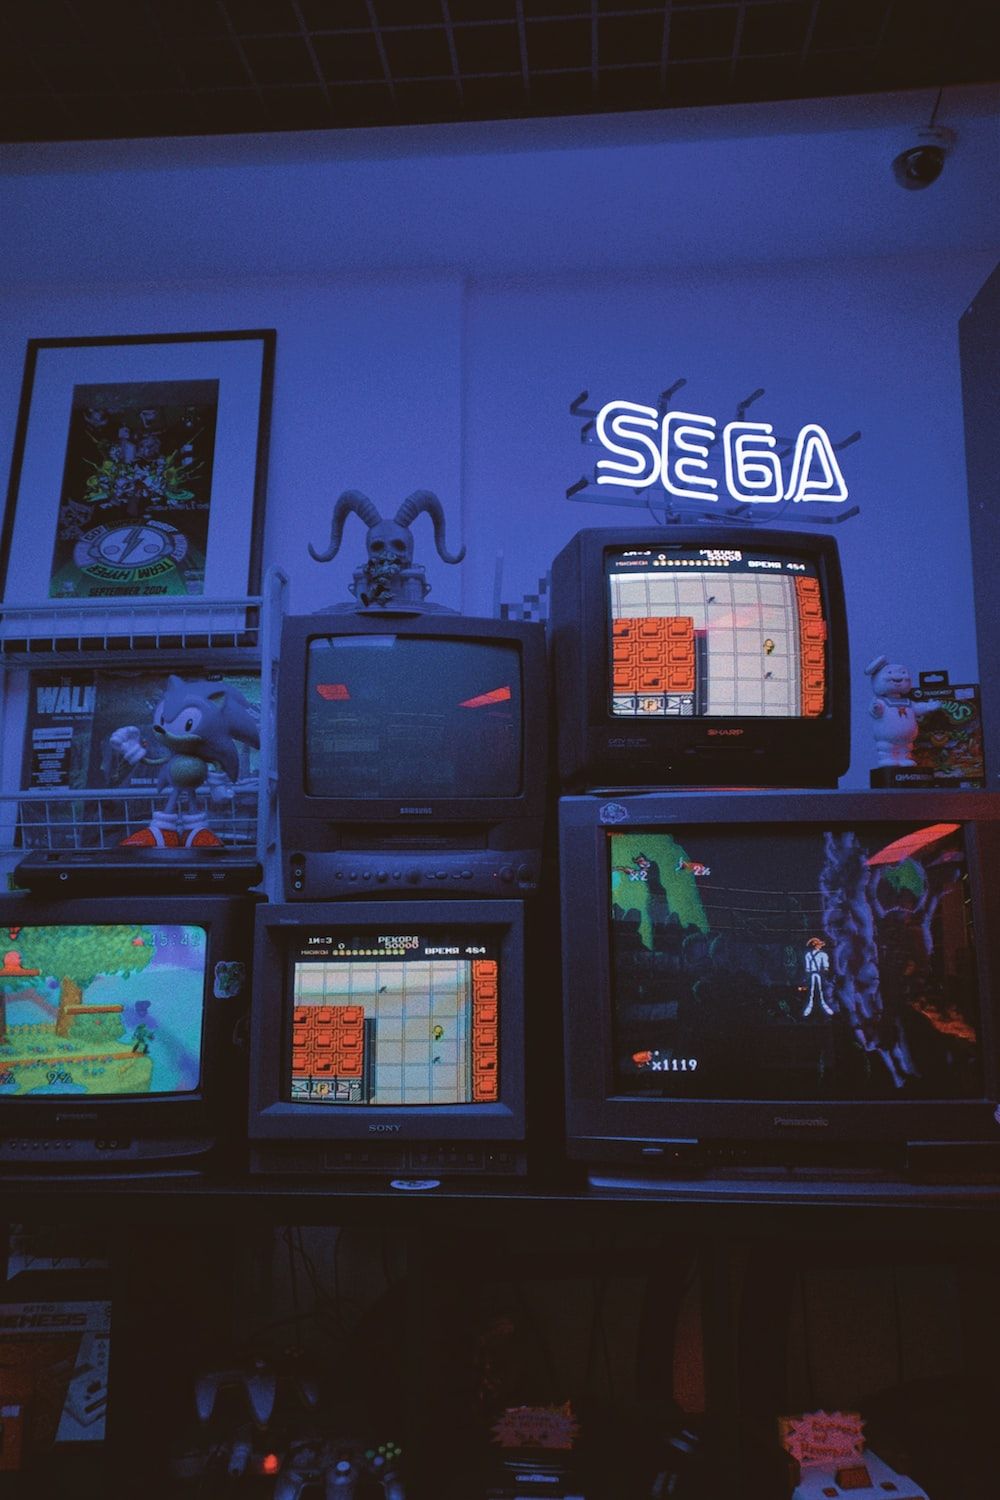 A room with a neon sign that says SEGA and many TVs - Arcade